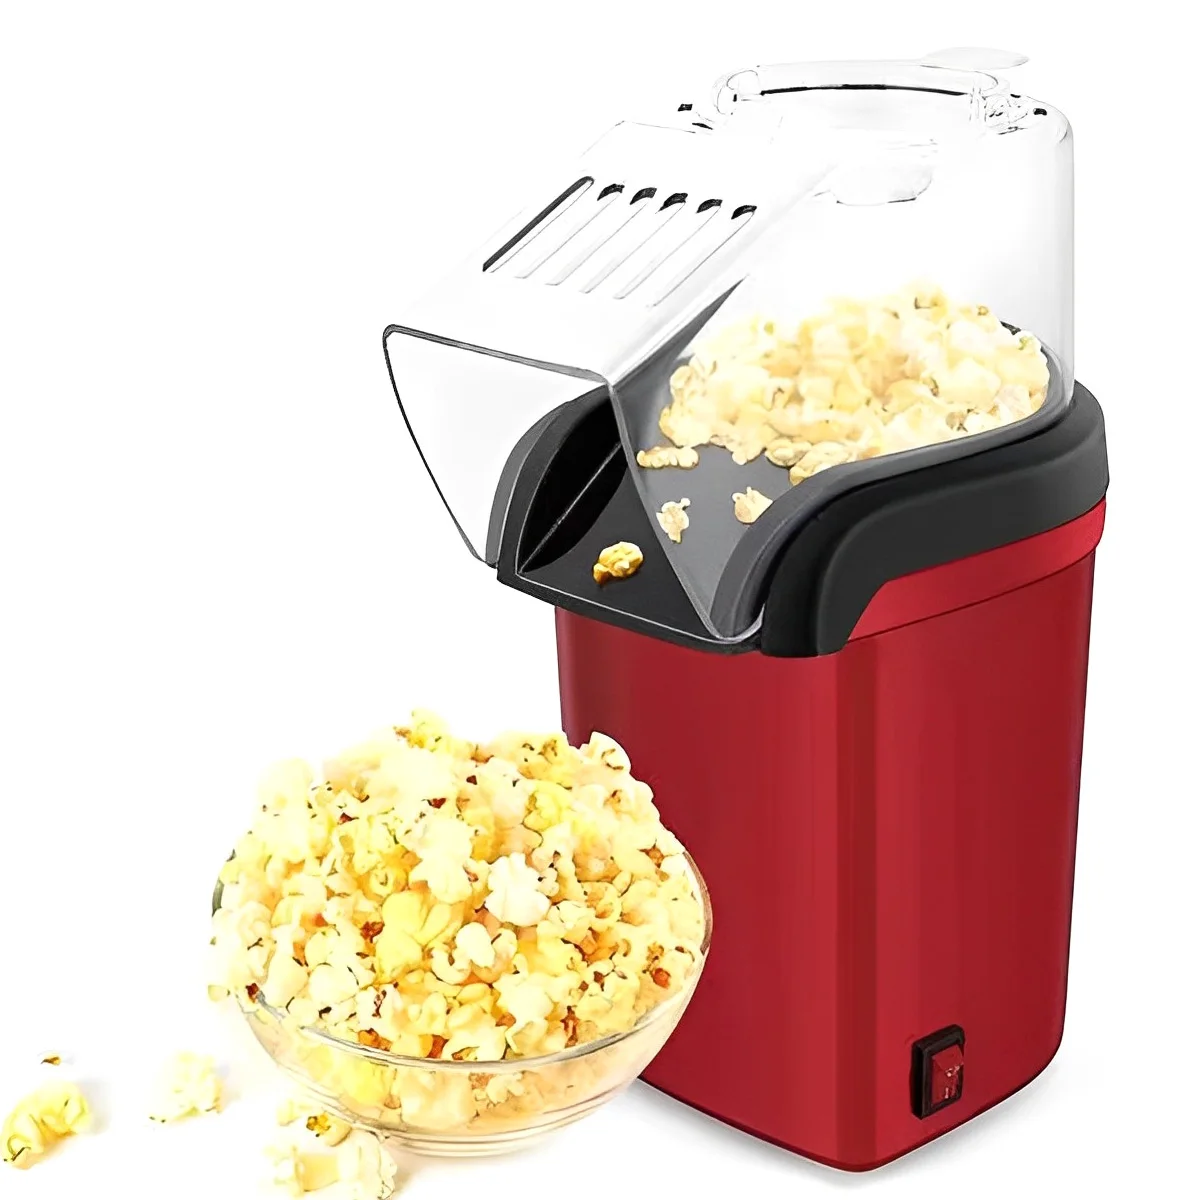 

Hot Air Popcorn Popper with Measuring Cup Top Lid Reusable 1200W Popcorn Maker 2 Minute Fast Popcorn Popper Machine High